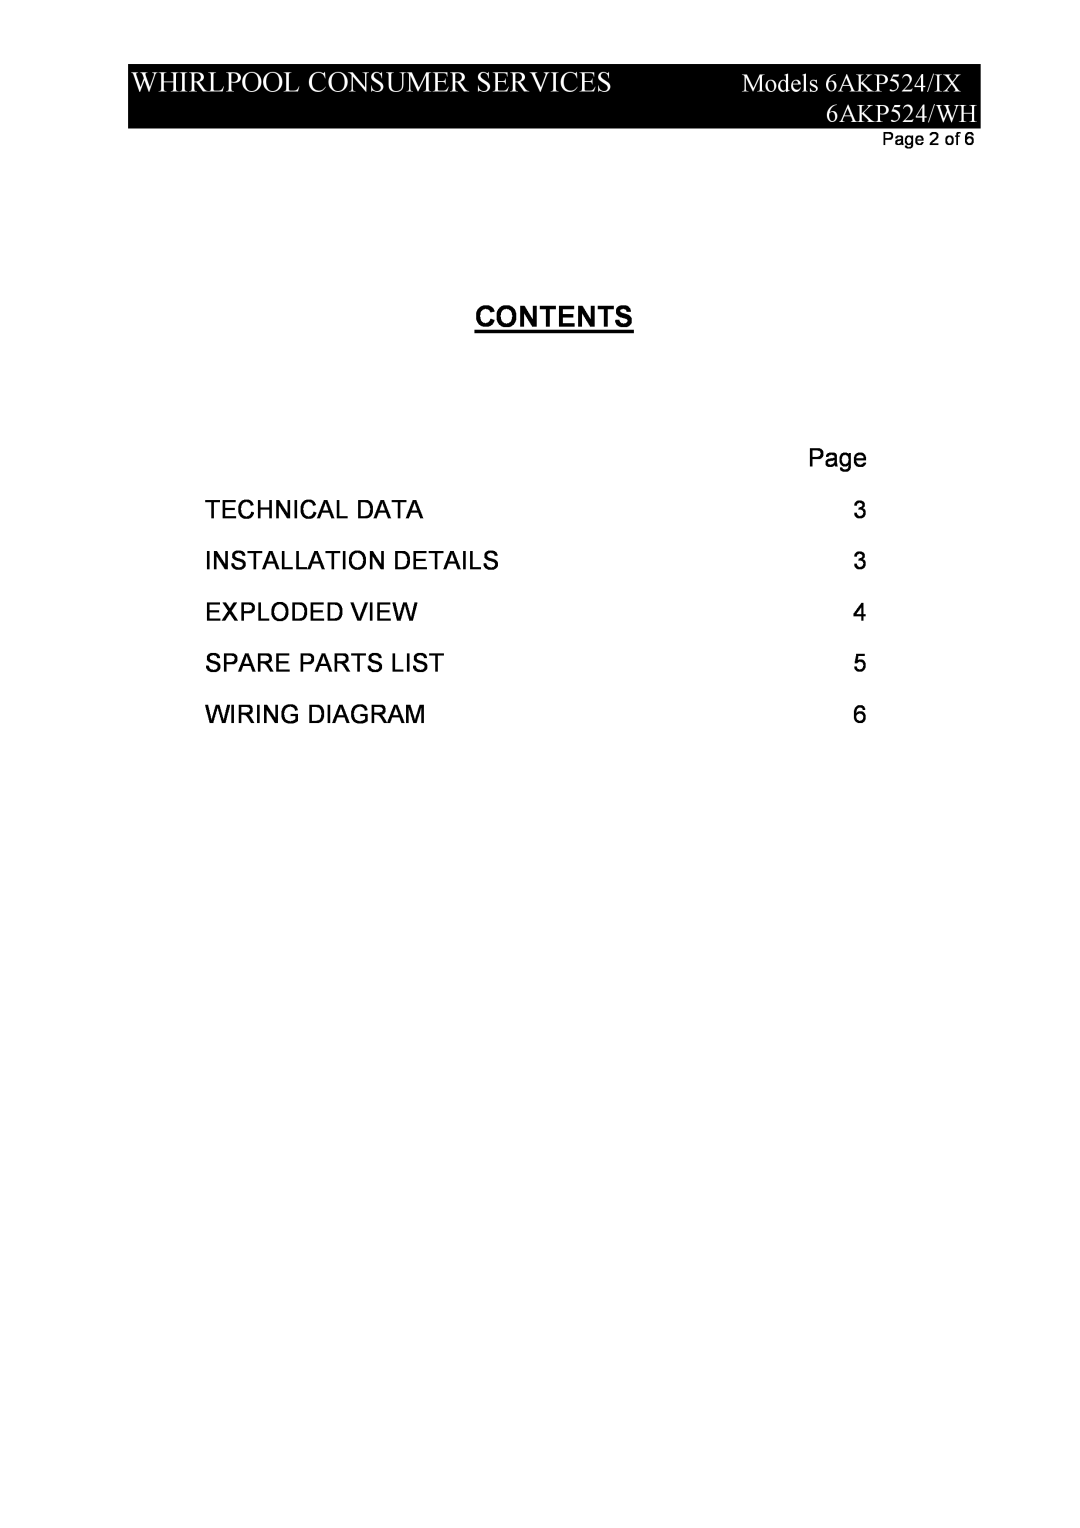 Whirlpool 6AKP524/WH service manual Whirlpool Consumer Services, Contents, Models 6AKP524/IX 